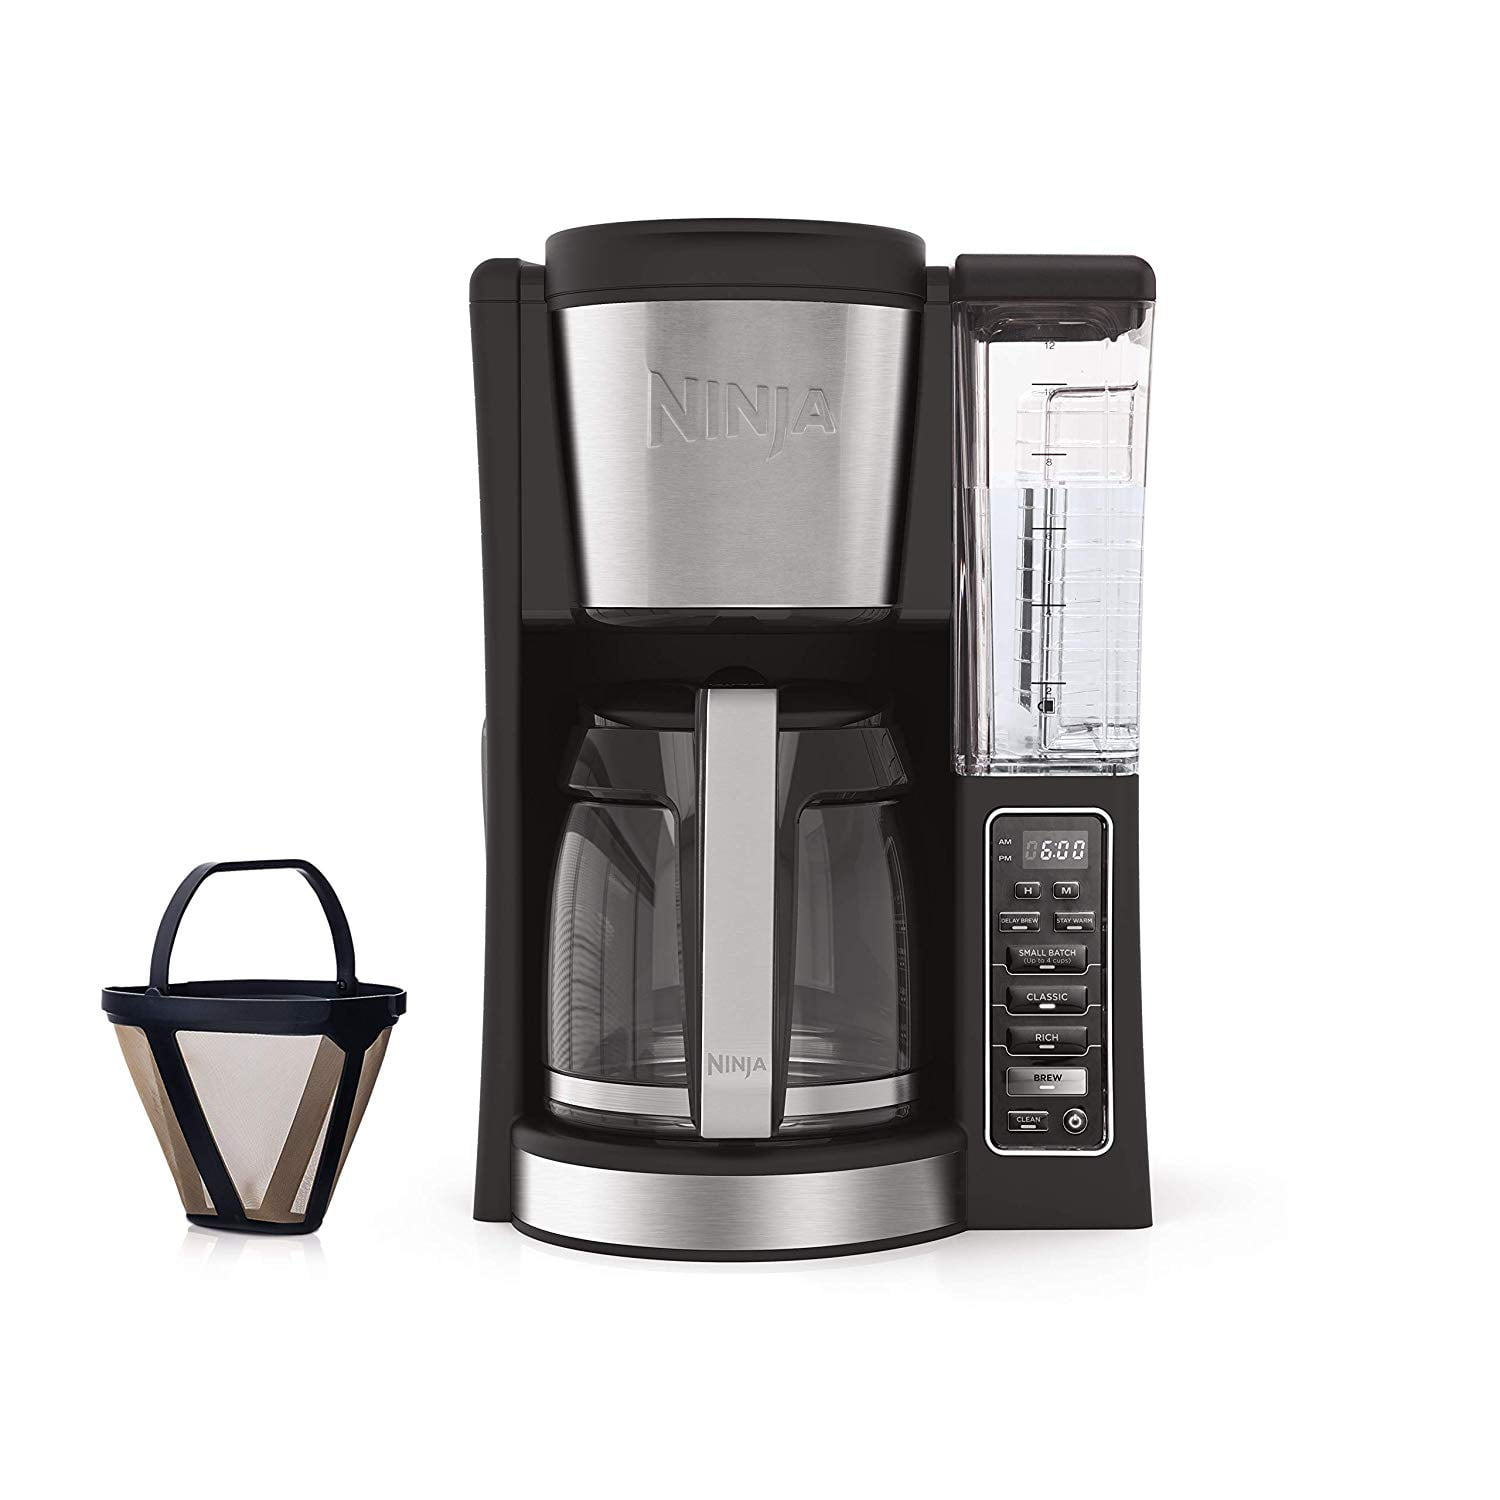 Ninja 12-Cup Programmable Coffee Maker with Classic and Rich Brews, 60 Coffee Maker With Stainless Steel Reservoir